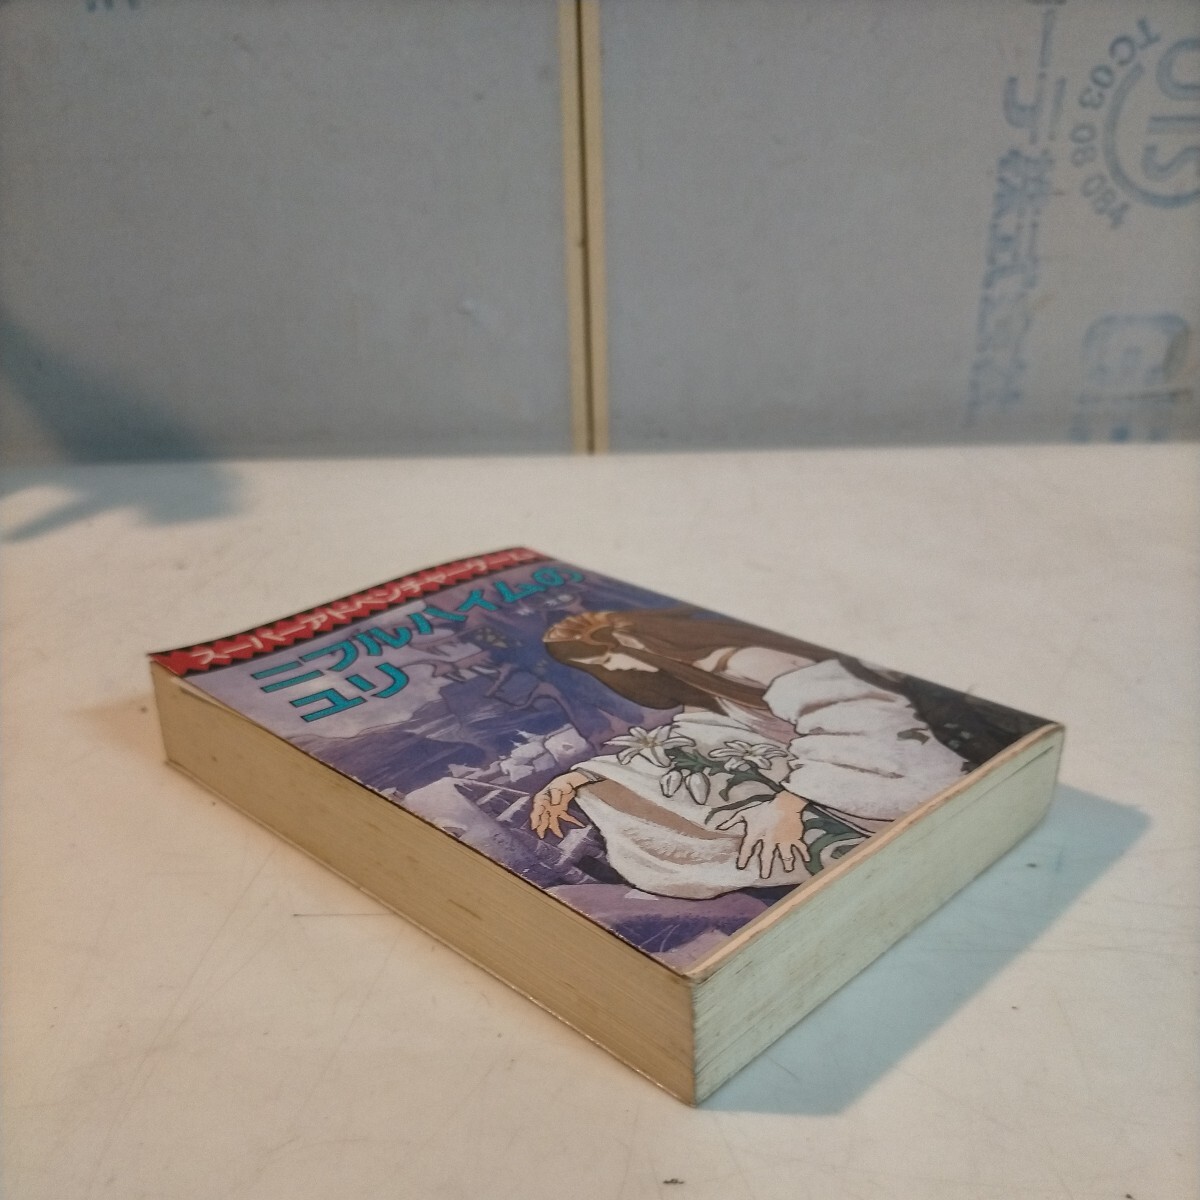  super adventure game ni full high m. lily .... origin detective library * secondhand book / attrition scorch dirty some stains / photograph . please verify / present condition delivery /NCNR